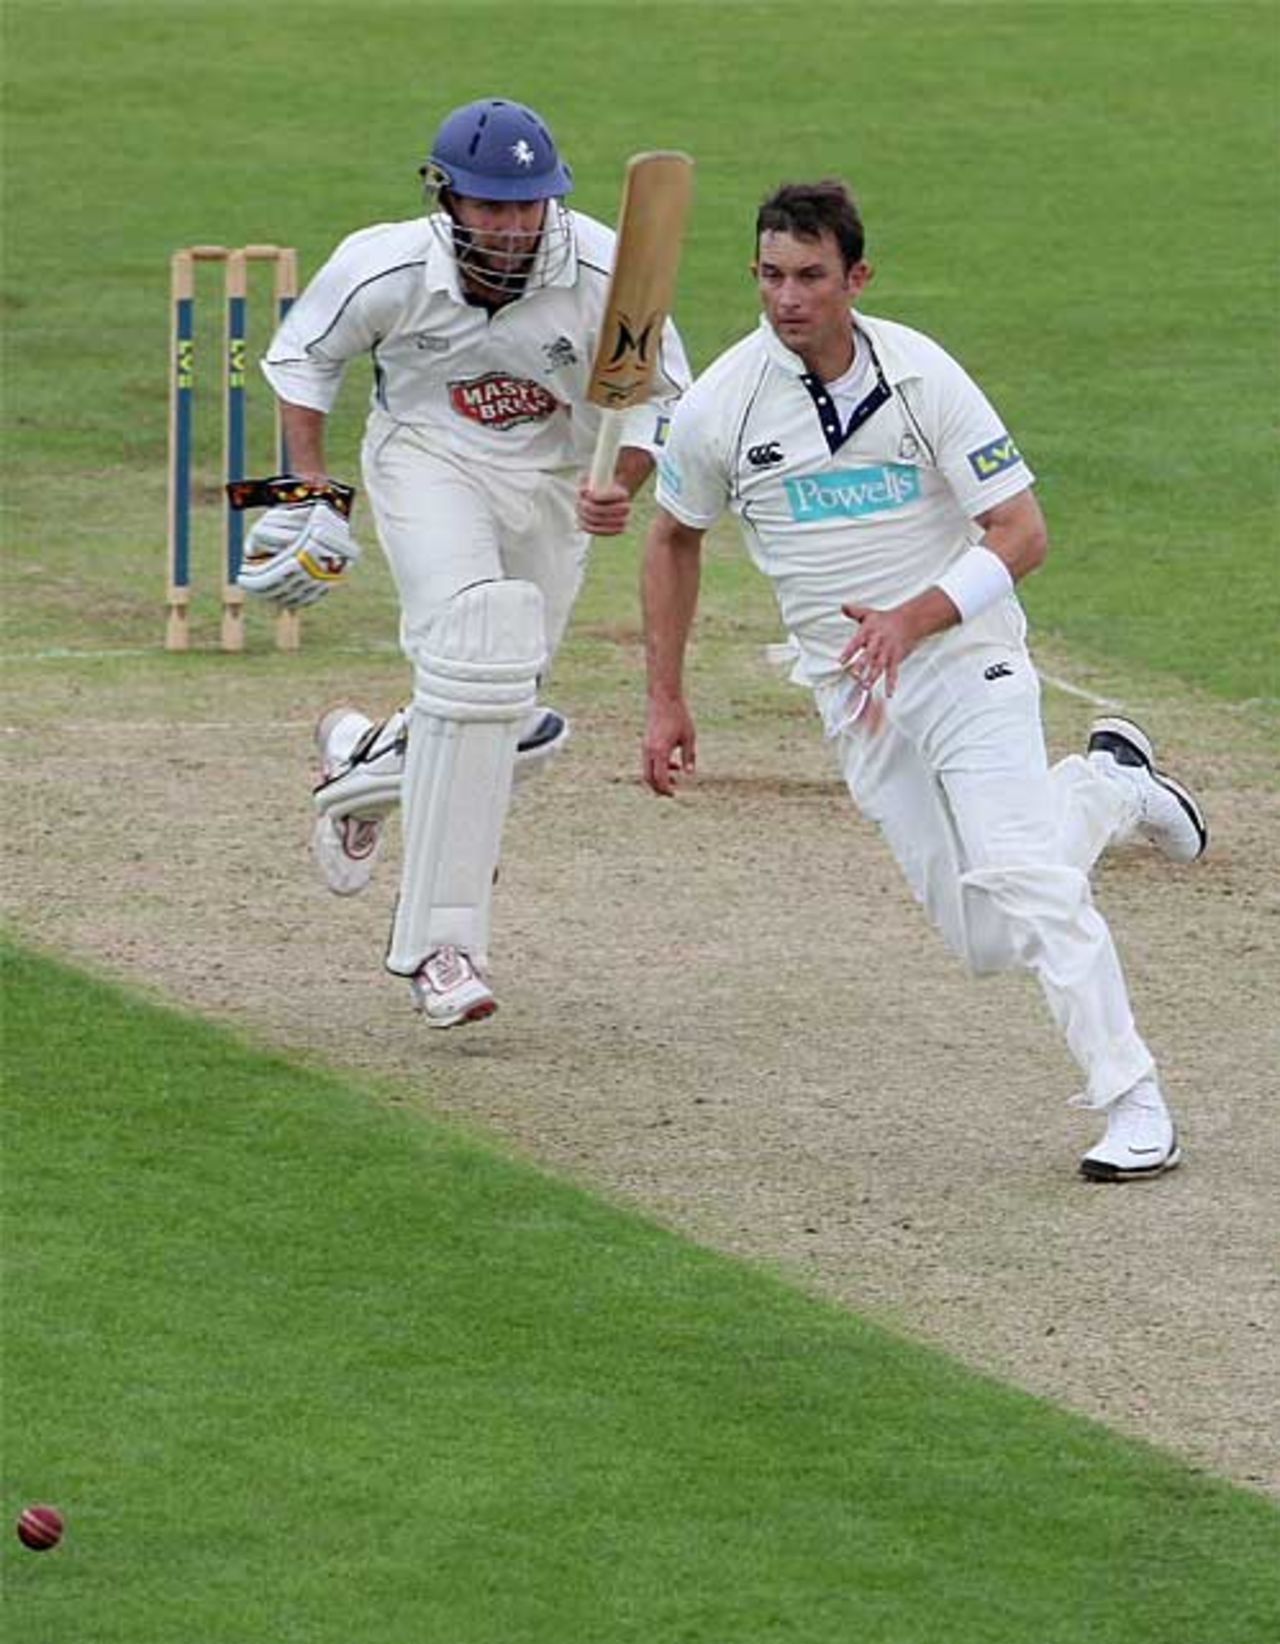 Collision course: Shane Bond and Martin van Jaarsveld cross paths, Hampshire v Kent, County Championship, The Rose Bowl, May 31, 2008